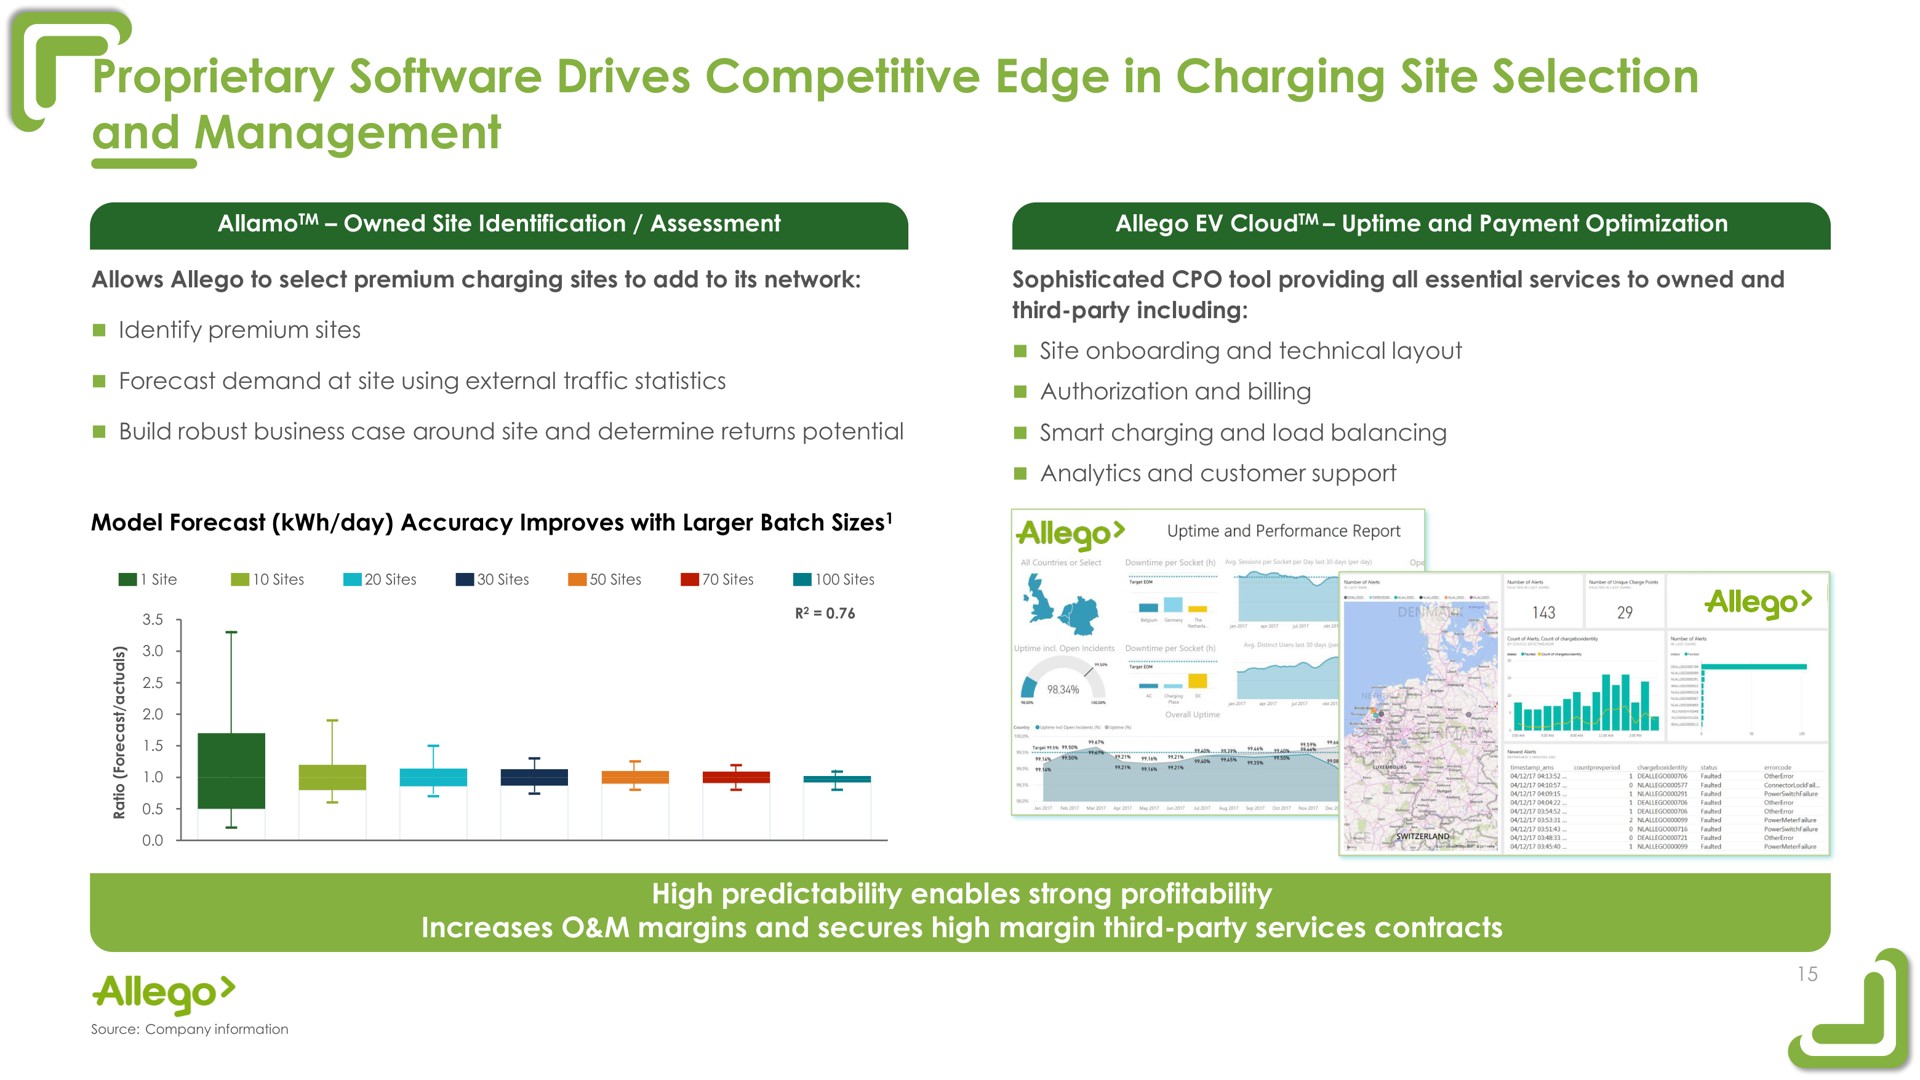 proprietary drives competitive edge in charging site selection and management me i sie me | Allego